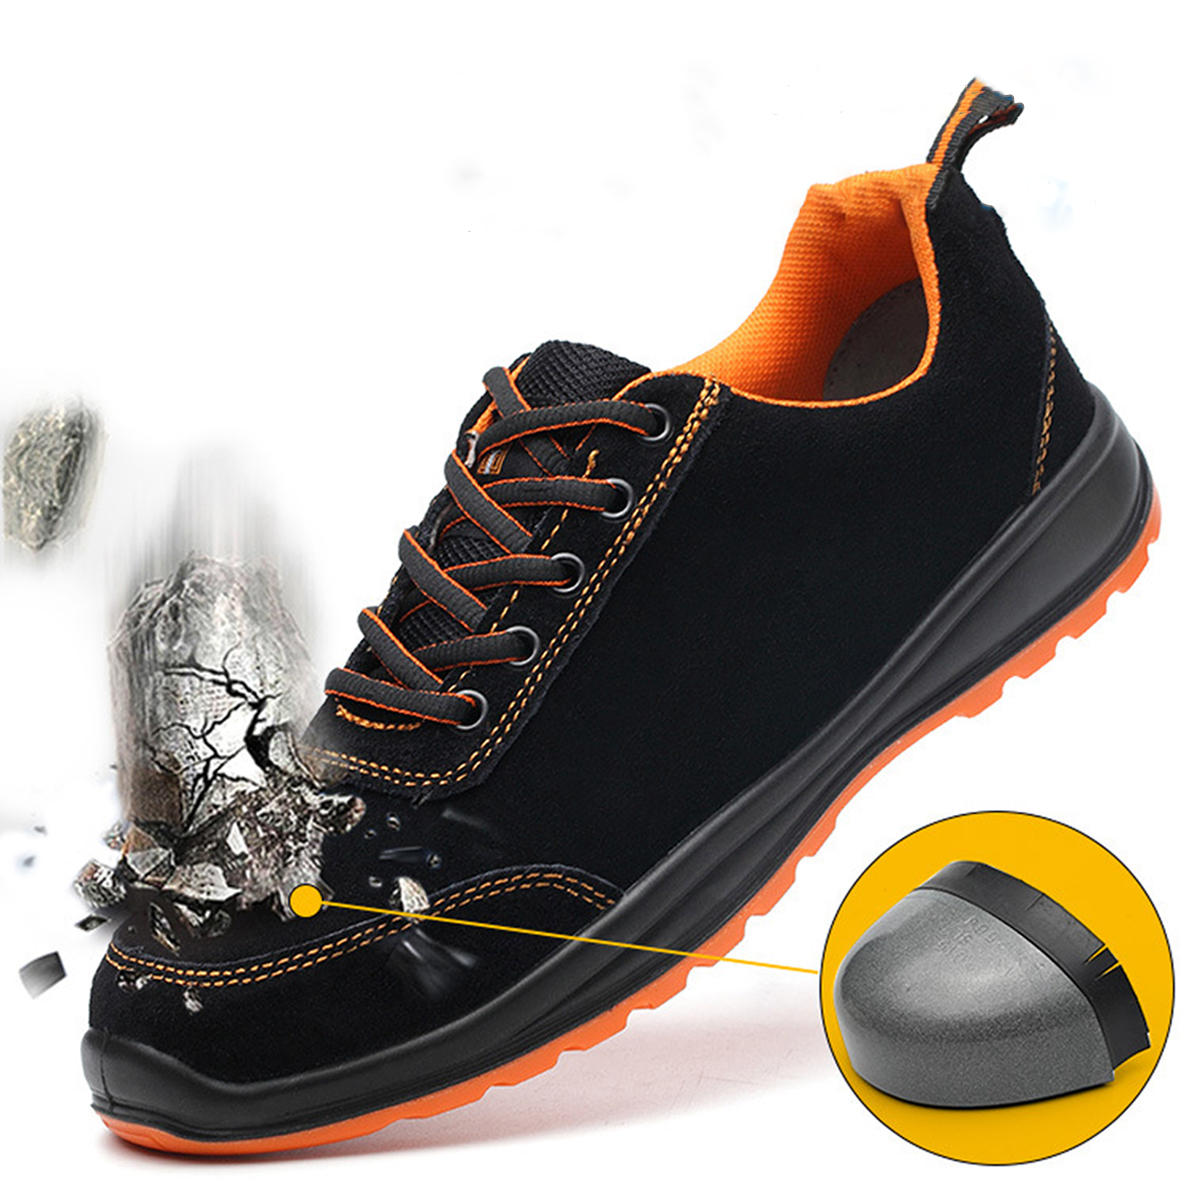 running safety shoes